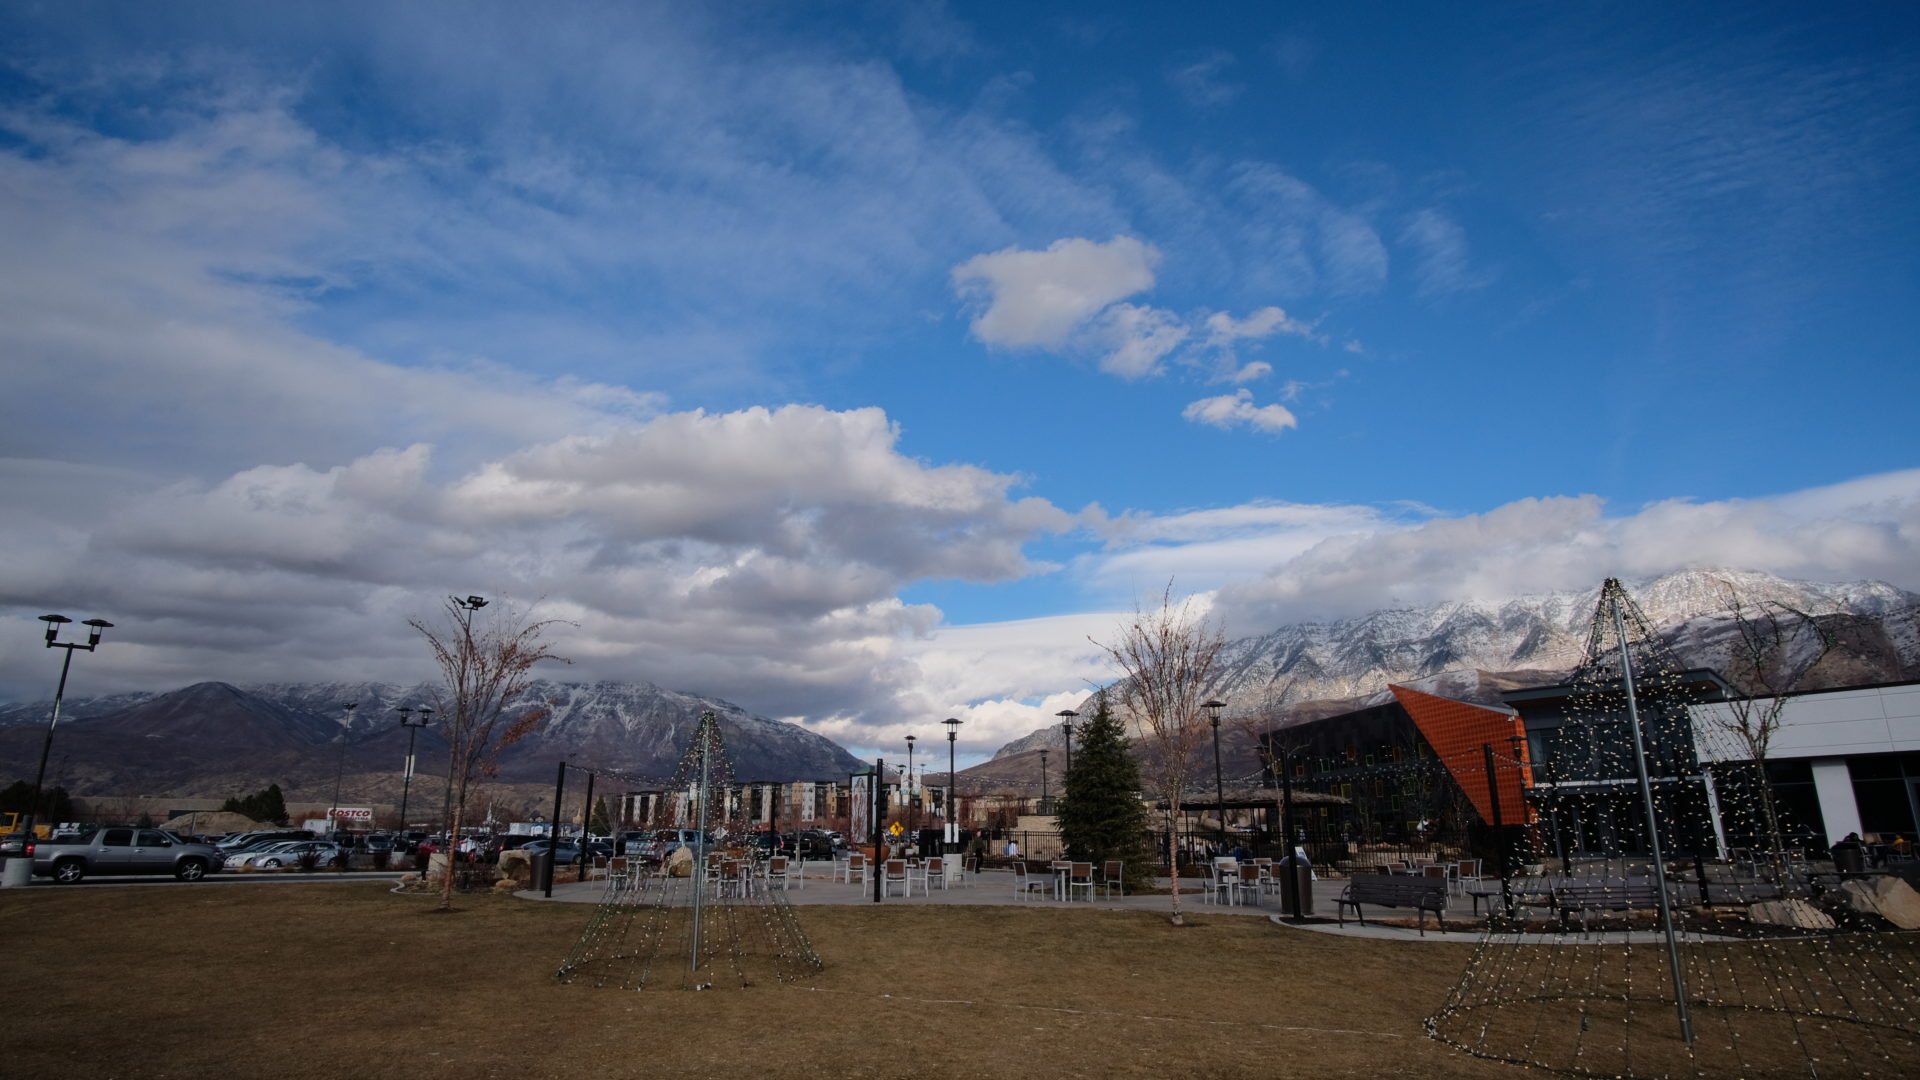 An ultra-wide angle view of Provo Canyon from University Place in Orem, Utah